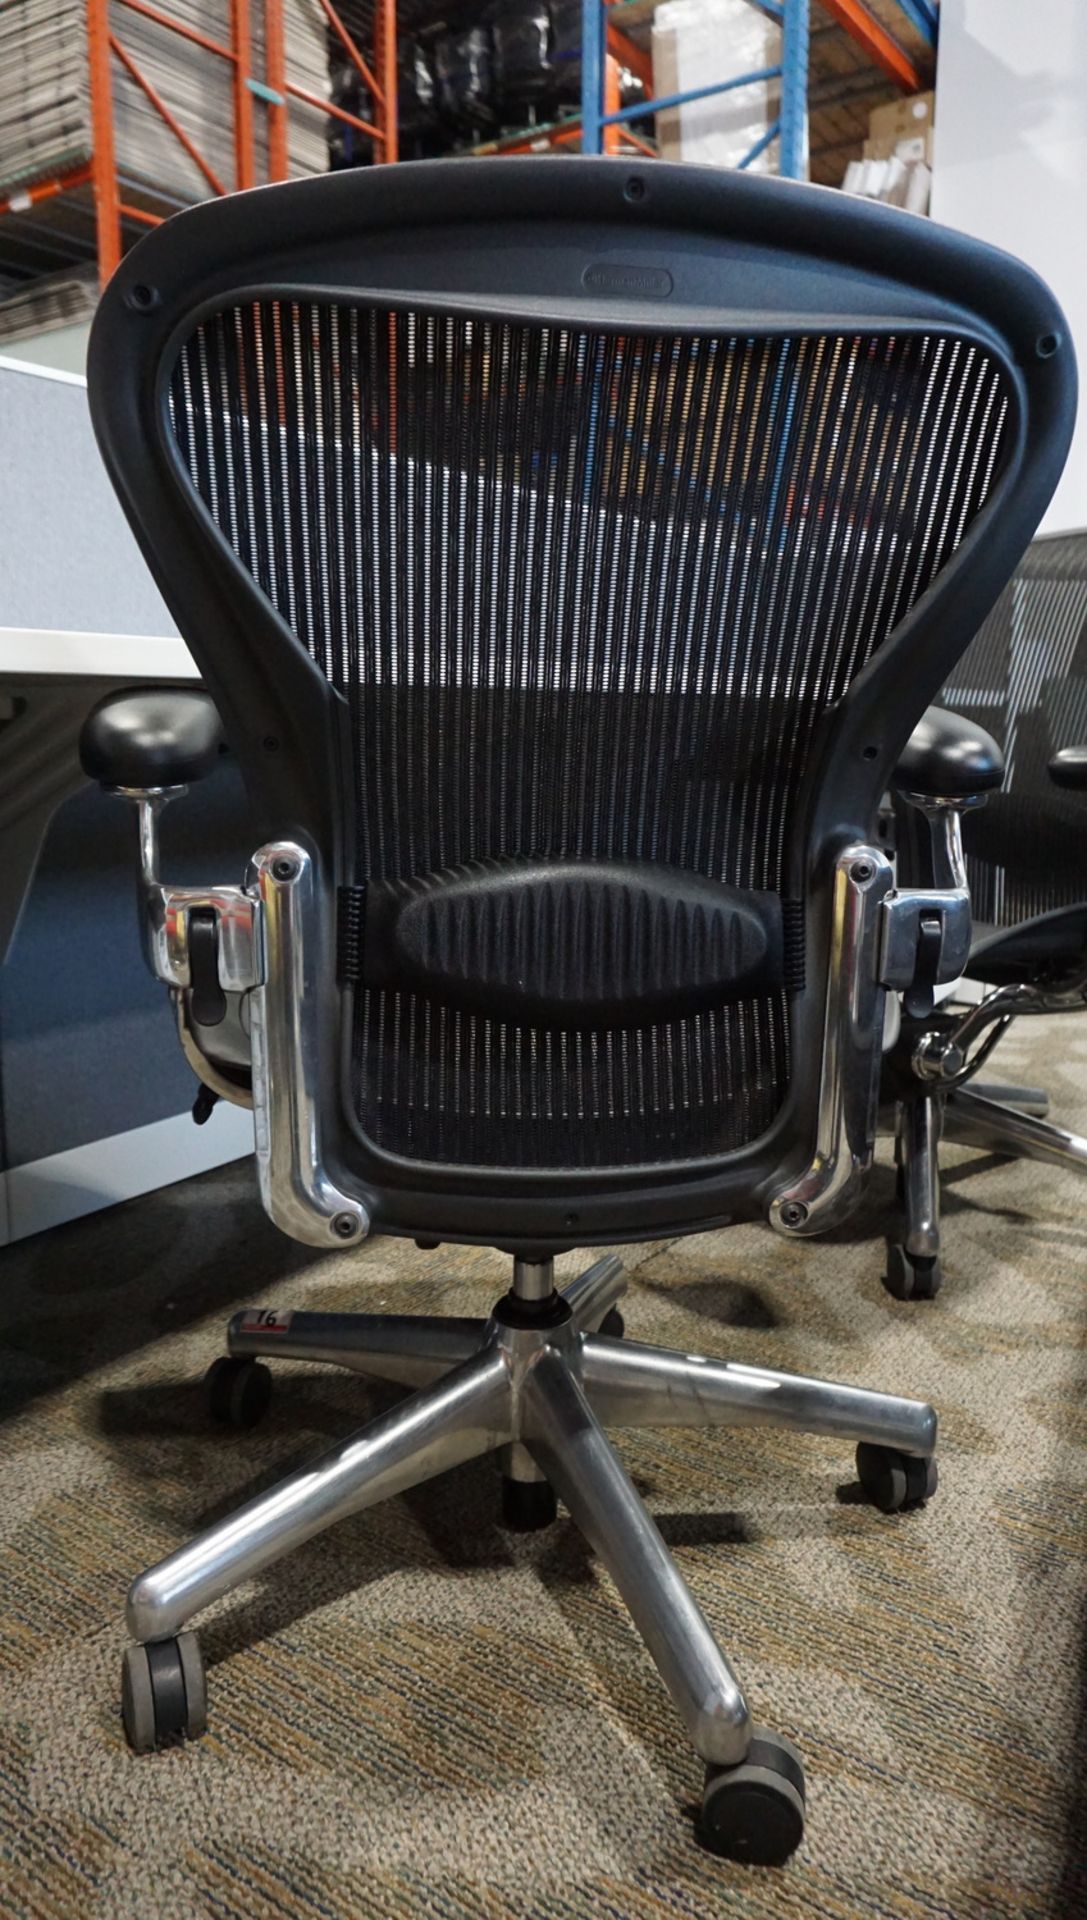 HERMAN MILLER AERON (SIZE B) OFFICE CHAIR W/ POLISHED ALUMINUM FRAME & BASE, LUMBAR SUPPORT, - Image 2 of 2